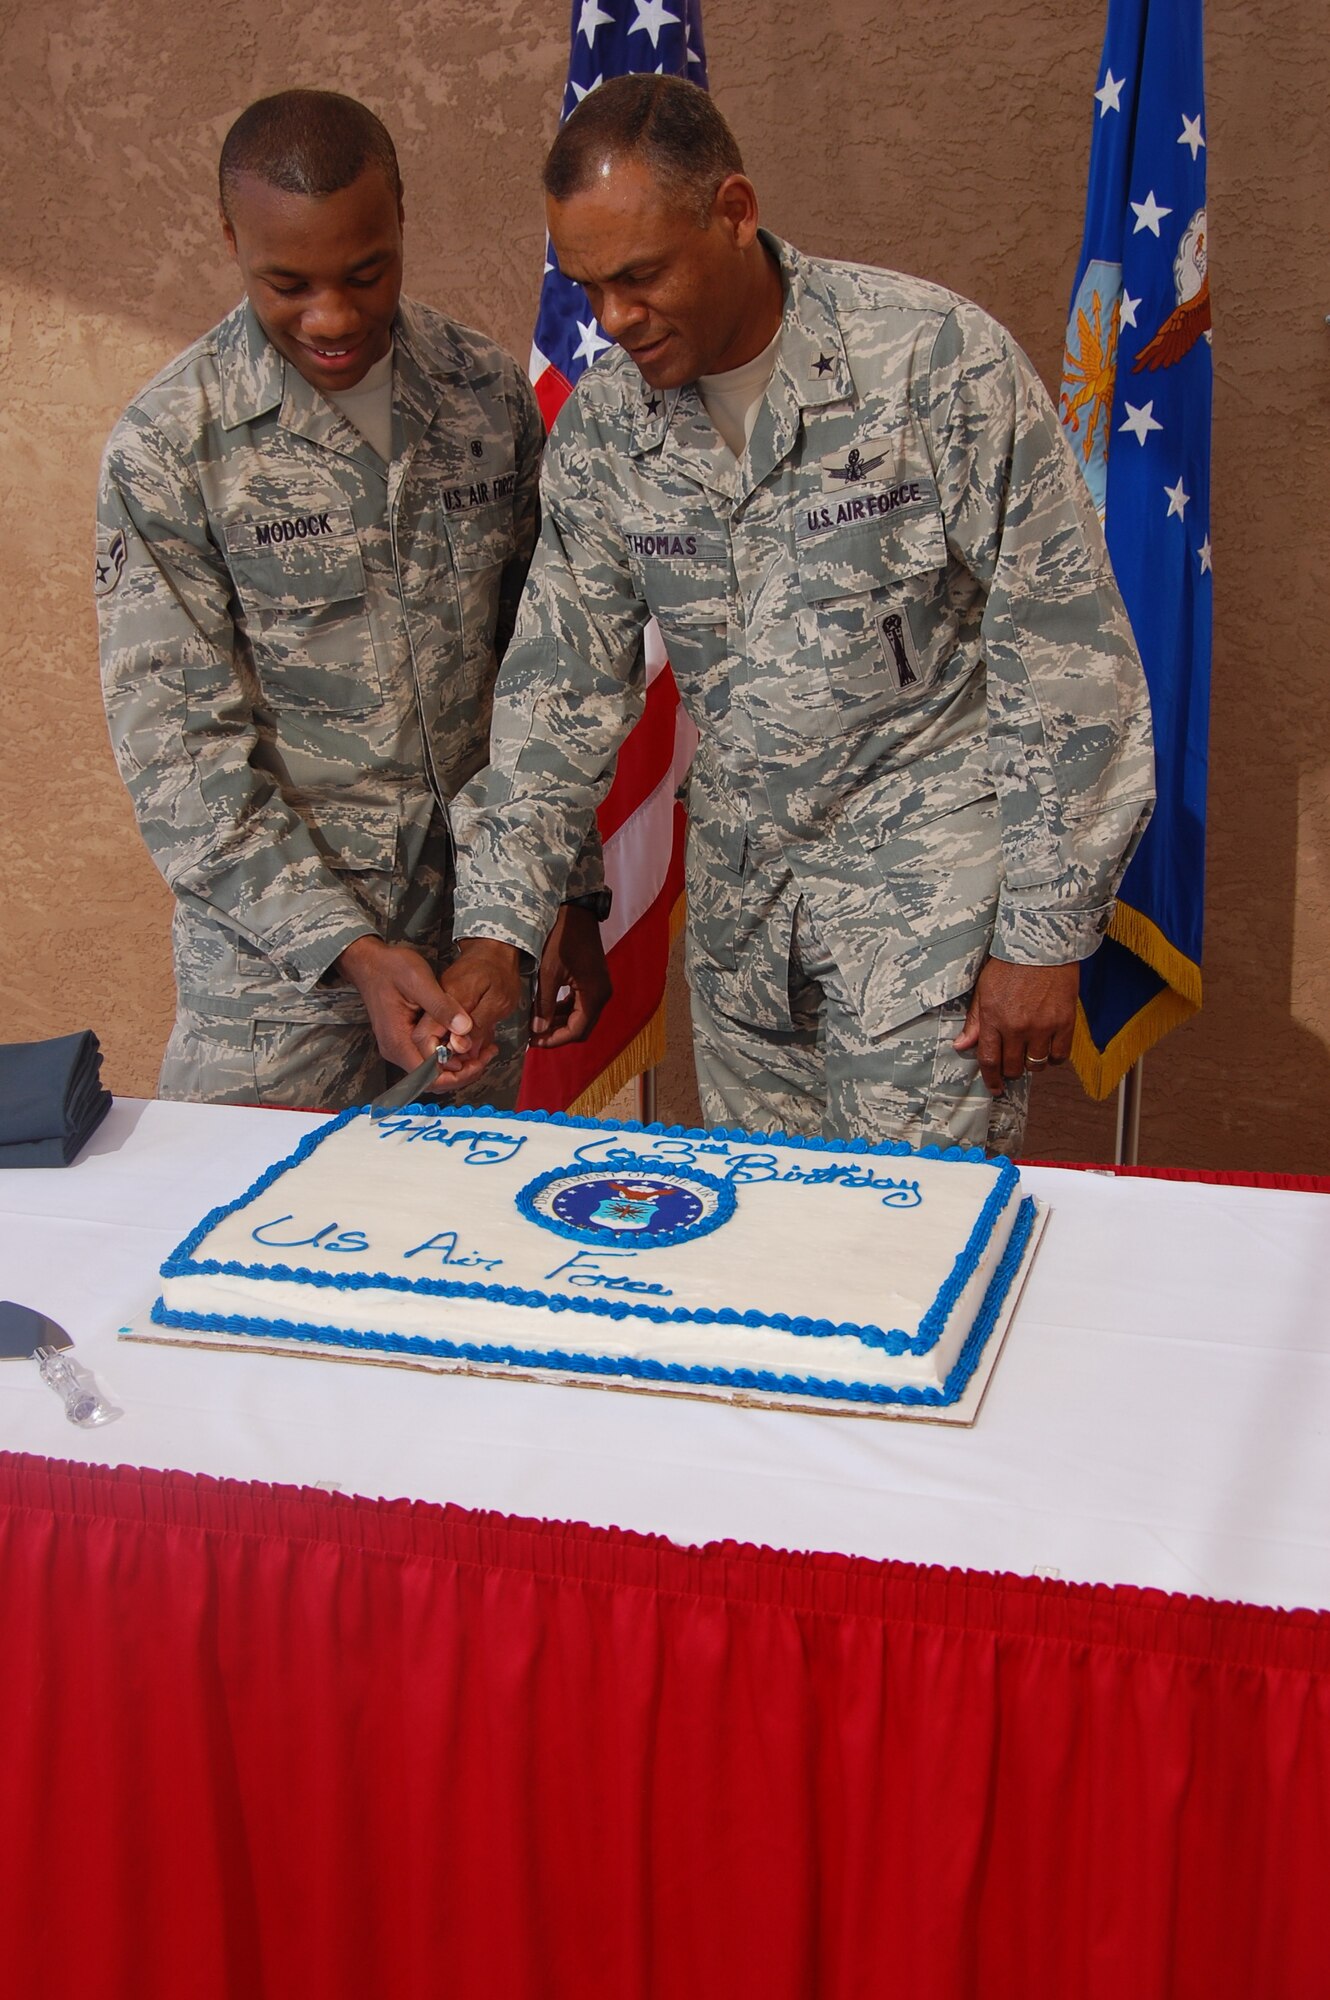 Brig. Gen. Everett Thomas, Air Force Nuclear Weapons Center commander, right, cuts the cake with one of Kirtland AFB’s youngest Airmen, Airman 1st Class Bre’Jon Modock, 377th Medical Operations Squadron, during an Air Force birthday celebration Sept. 17 at the Mountain View Club.  U.S. Air Force Photo by Jonathan Rejent